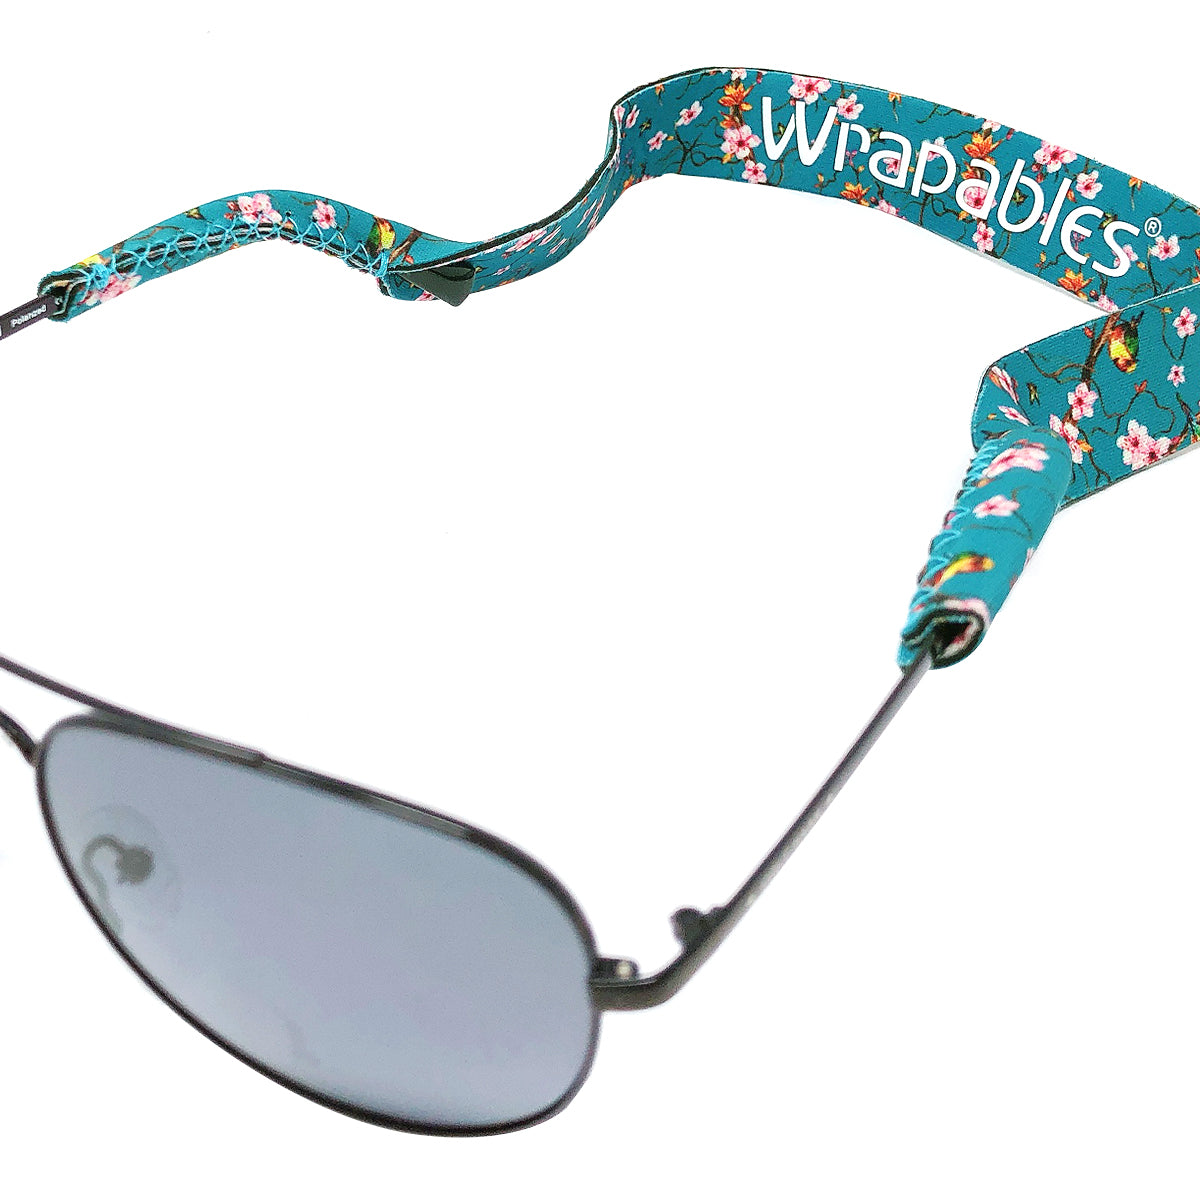 Wrapables Adjustable Eyewear Retainer, Sunglass Strap with Neoprene Floating Material for Sports and Outdoors (Set of 3)